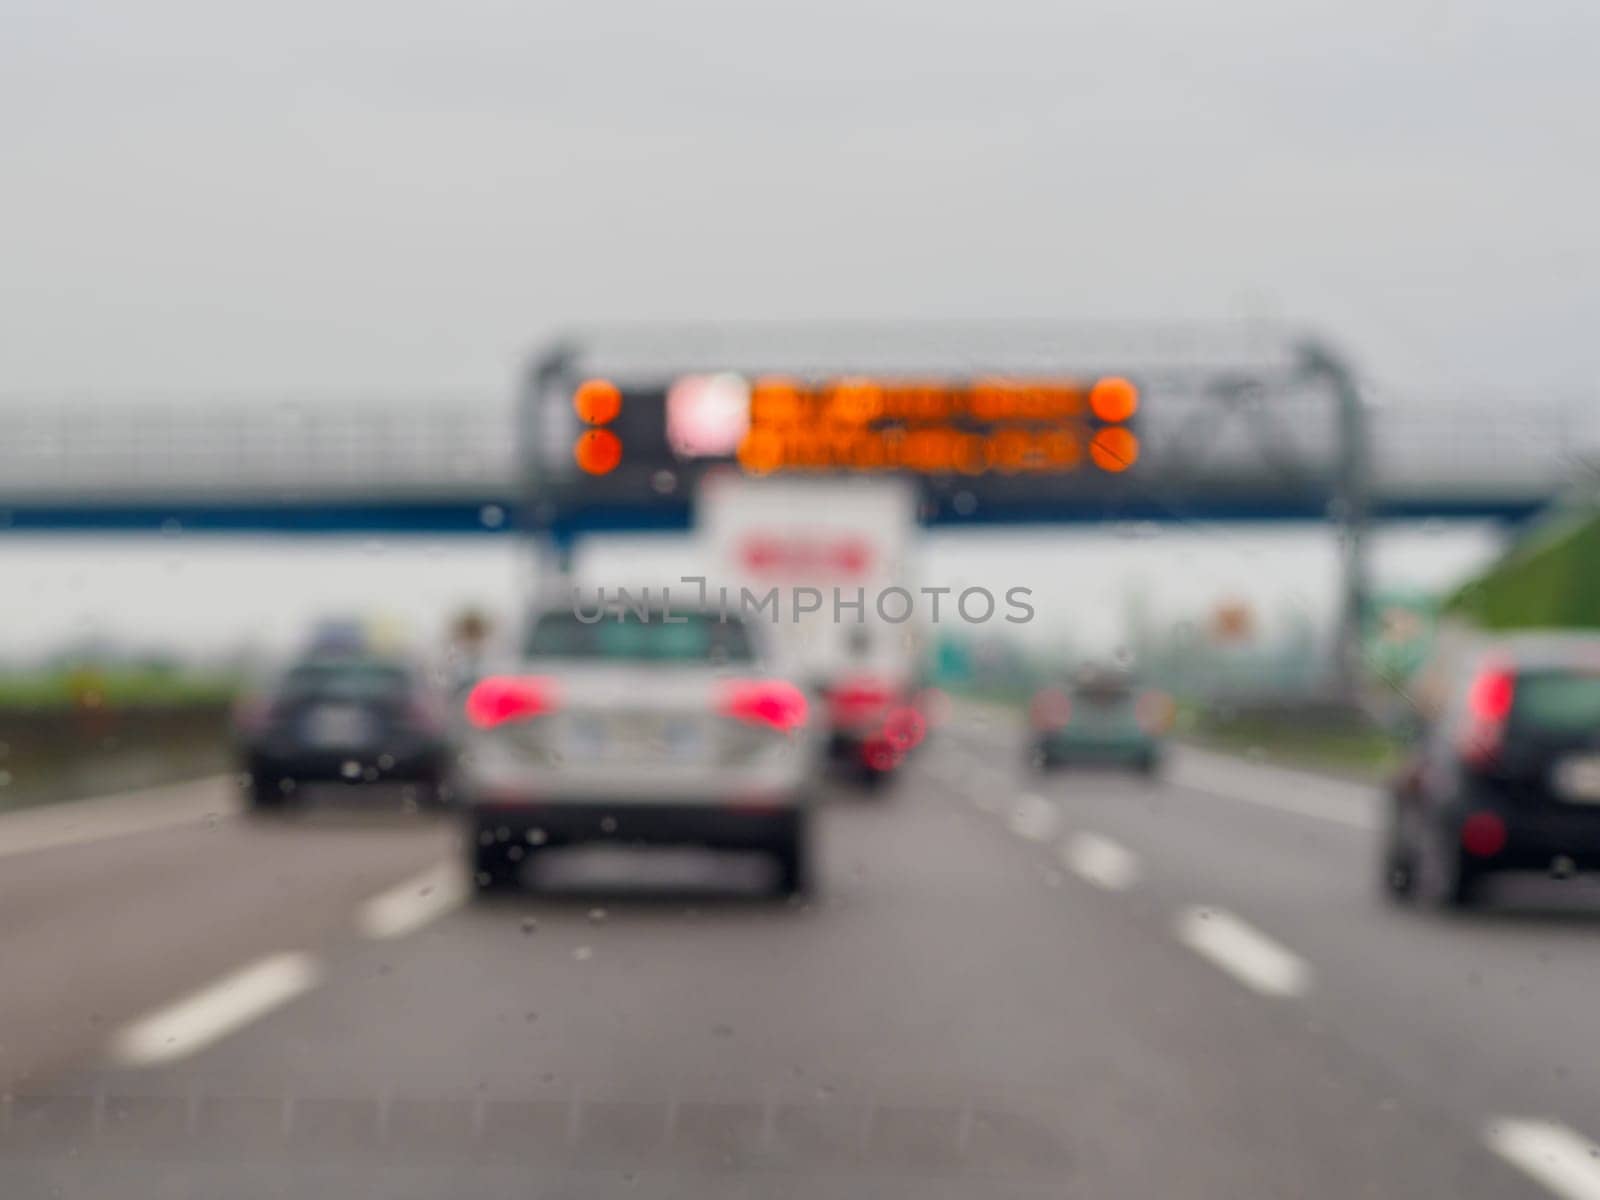 A blurry image of a busy highway with cars and a truck by verbano